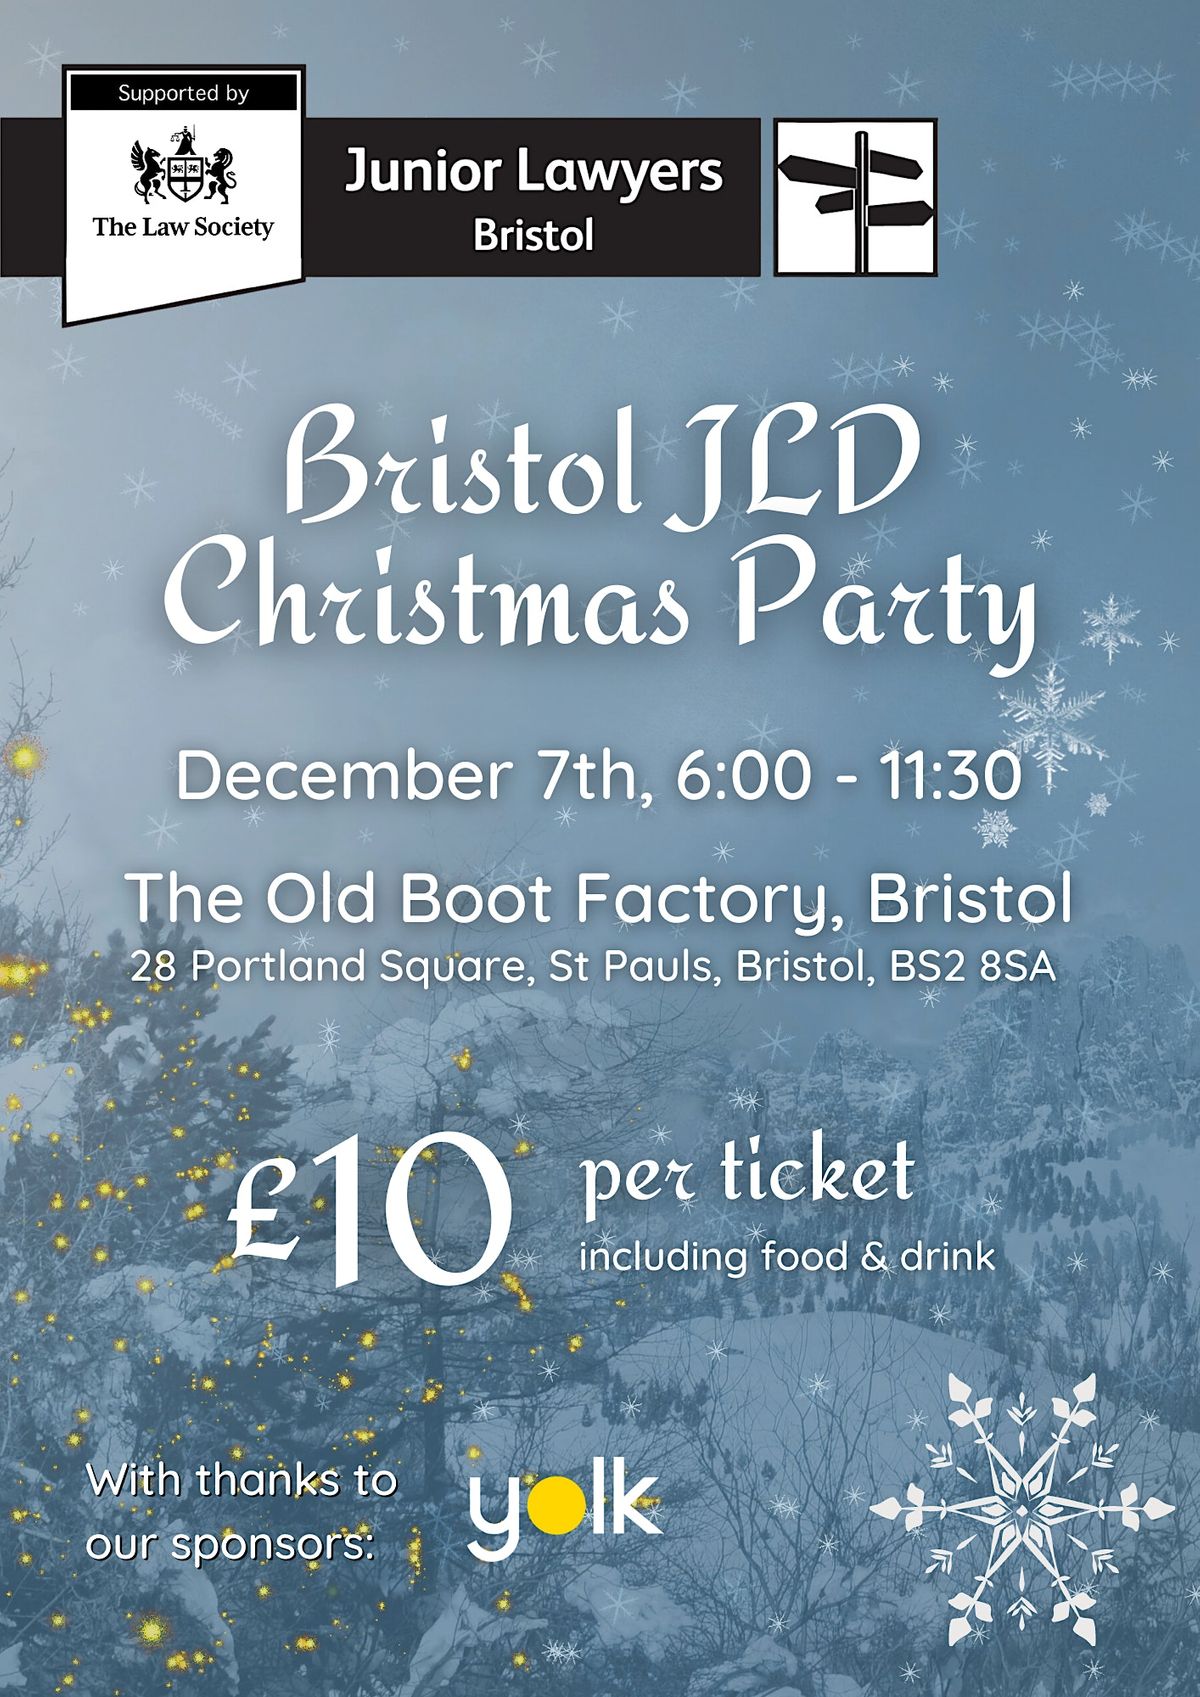 Bristol JLD Christmas Party!  -  Wednesday 7th December